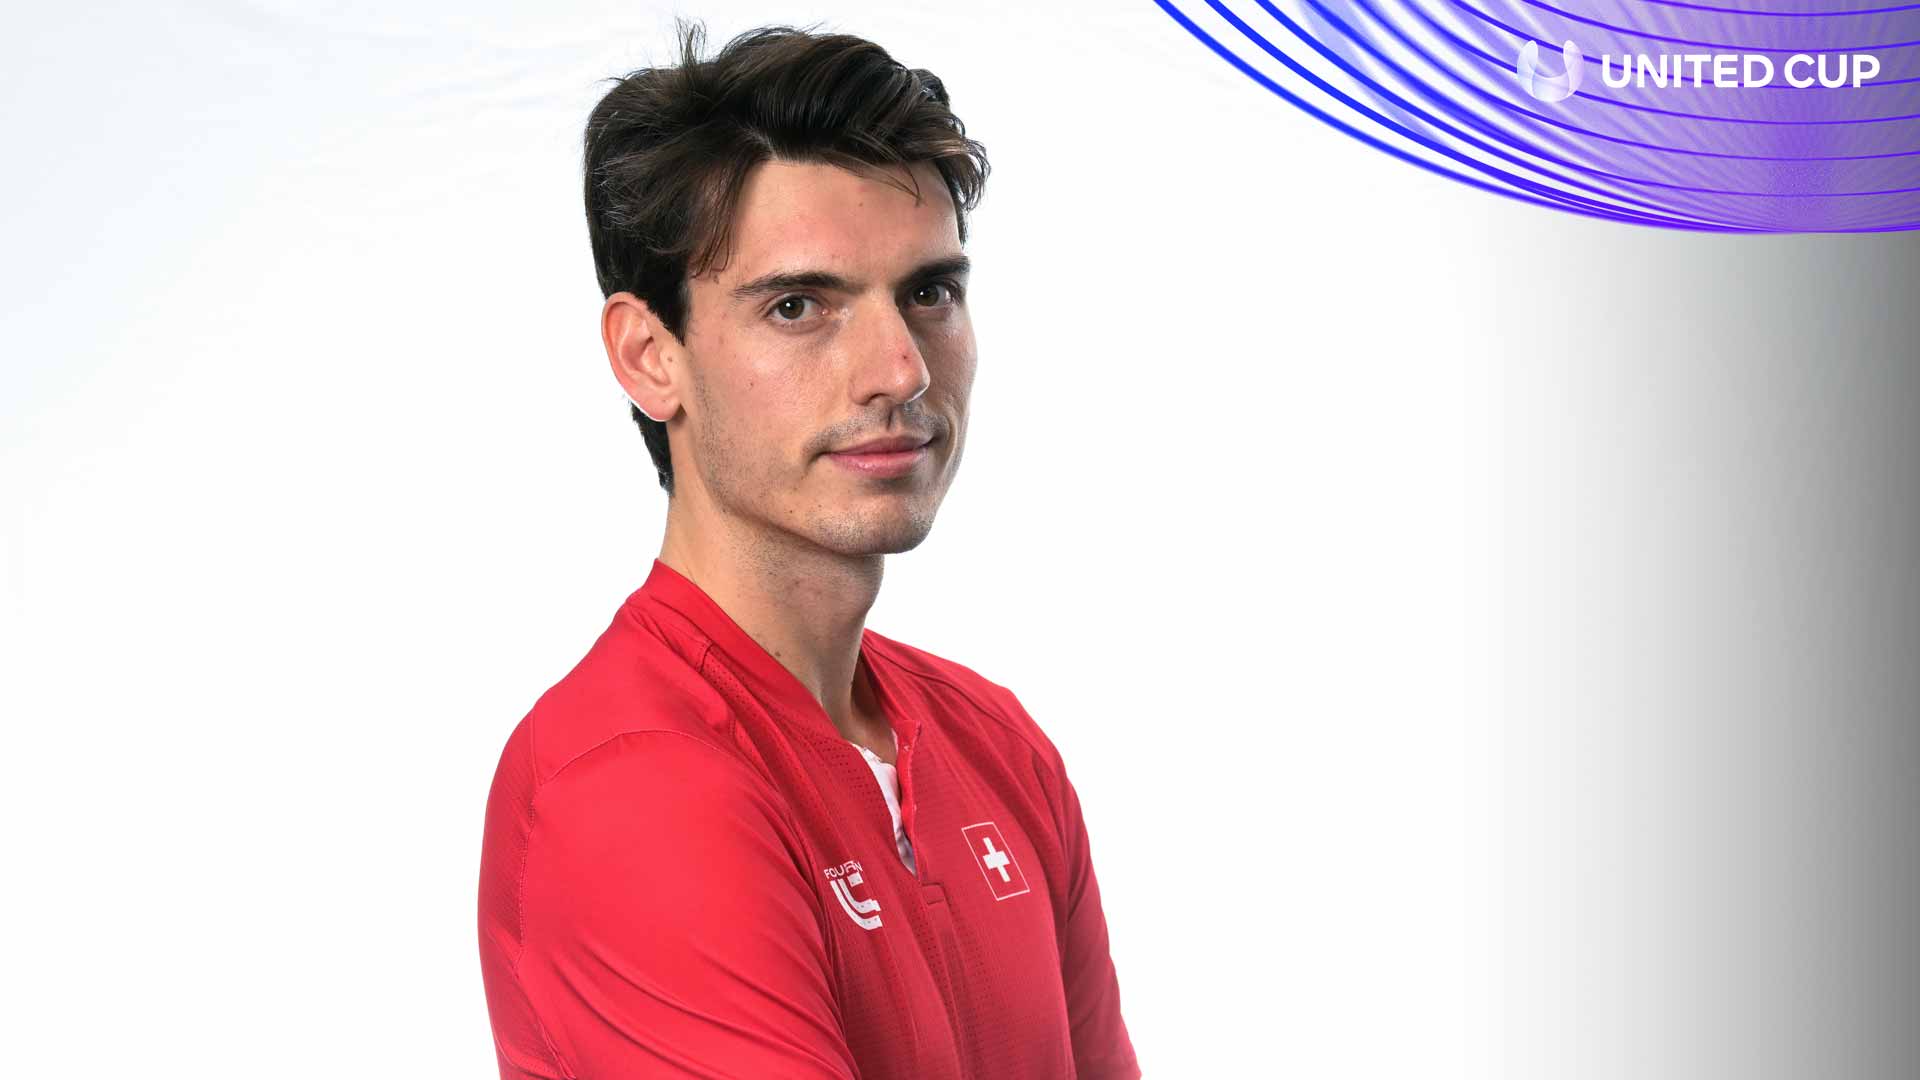 Marc-Andrea Huesler is the No. 2 men's singles player for Switzerland at the United Cup.